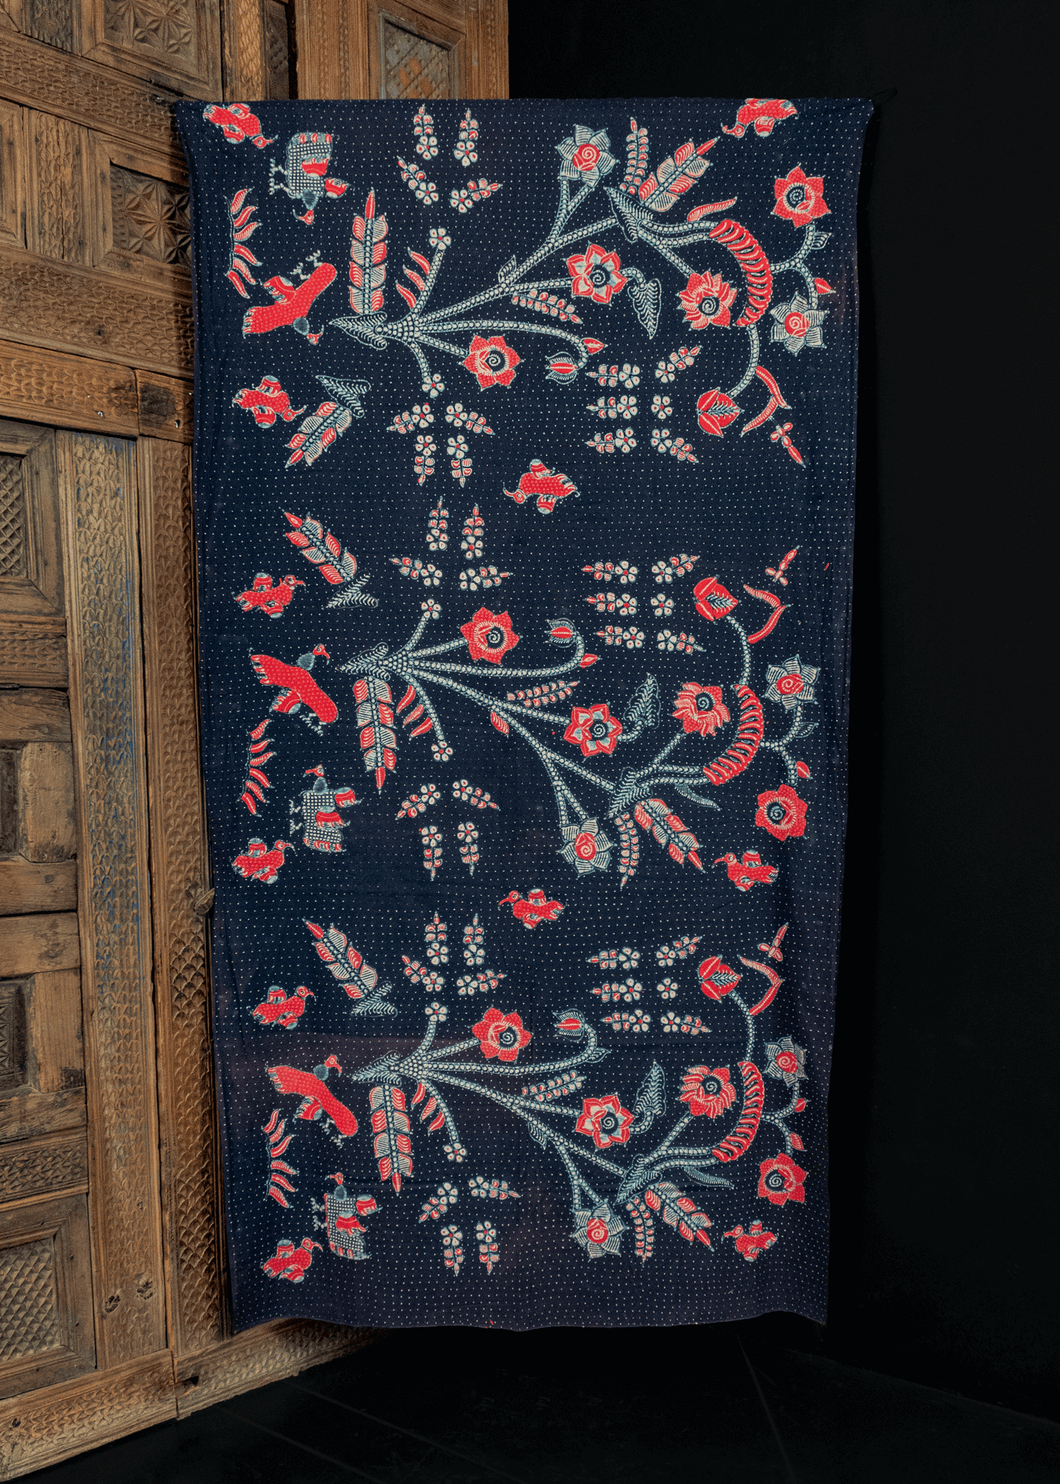 vintage skirtcloth from Java, Indonesia blockprinted with  a bouquet of flowers in red, white and blue on a dark blue ground with white polka dots. in very good condition, with some sun fading along old fold lines. 